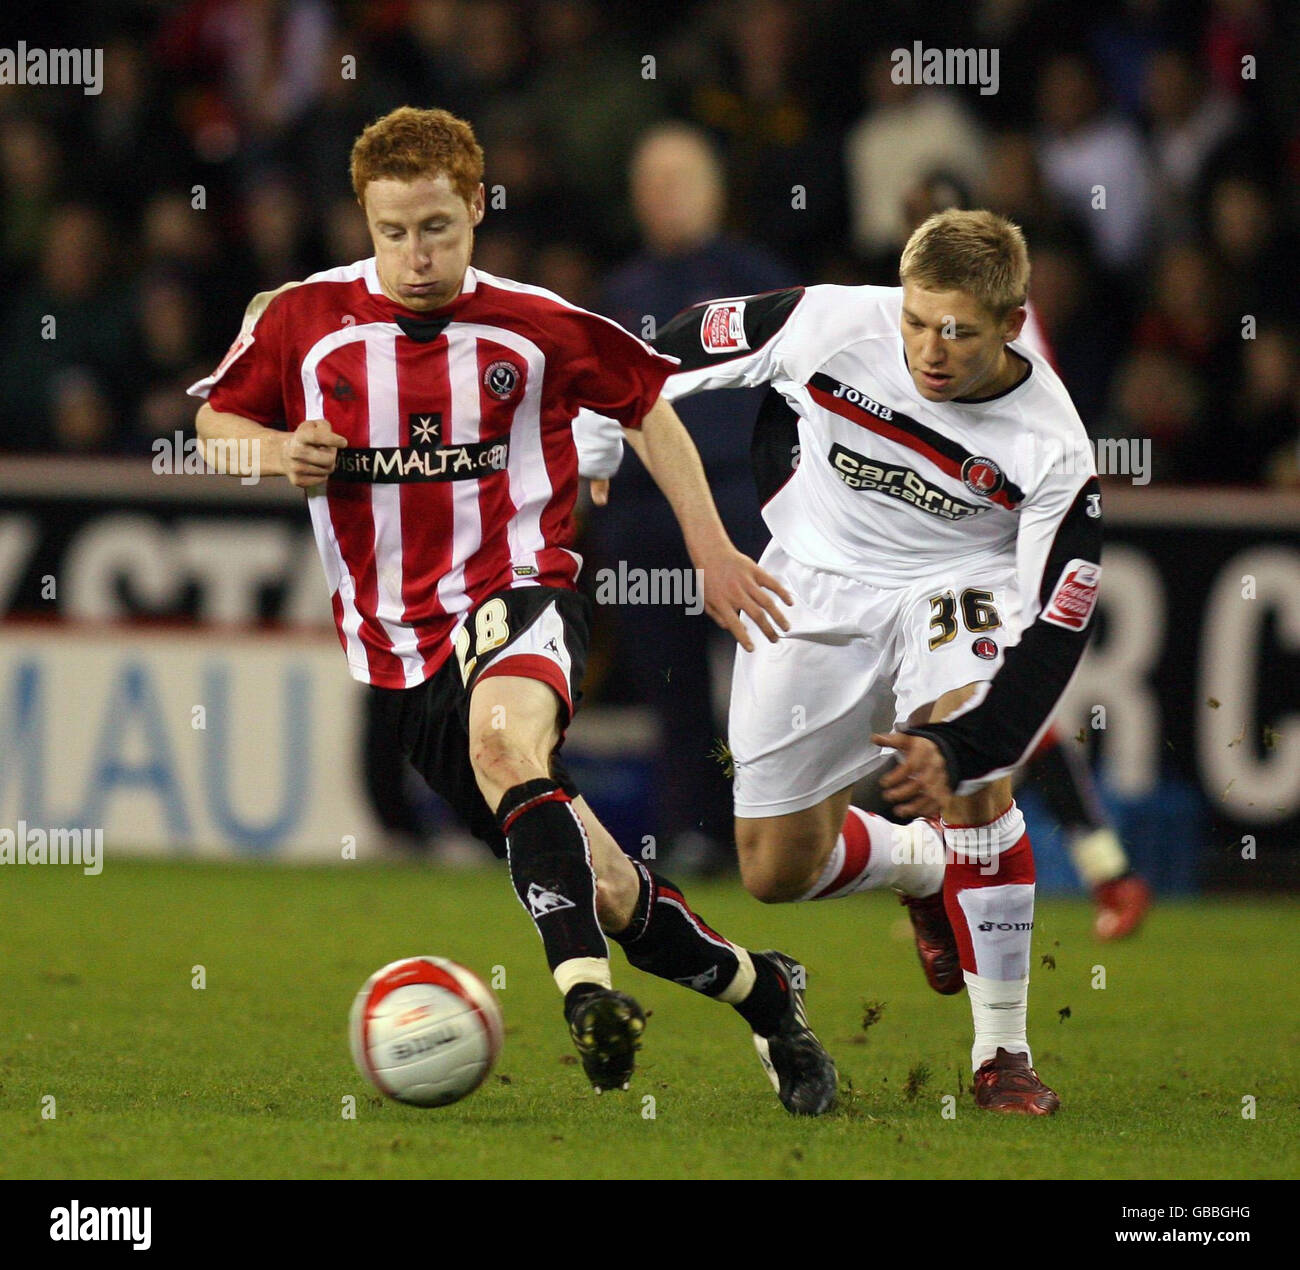 Sheffield United's Stephen Quinn and Charlton Athletic's Martyn Waghorn battle for the ball during the Coca-Cola Championship match at Bramall Lane, Sheffield. Stock Photo